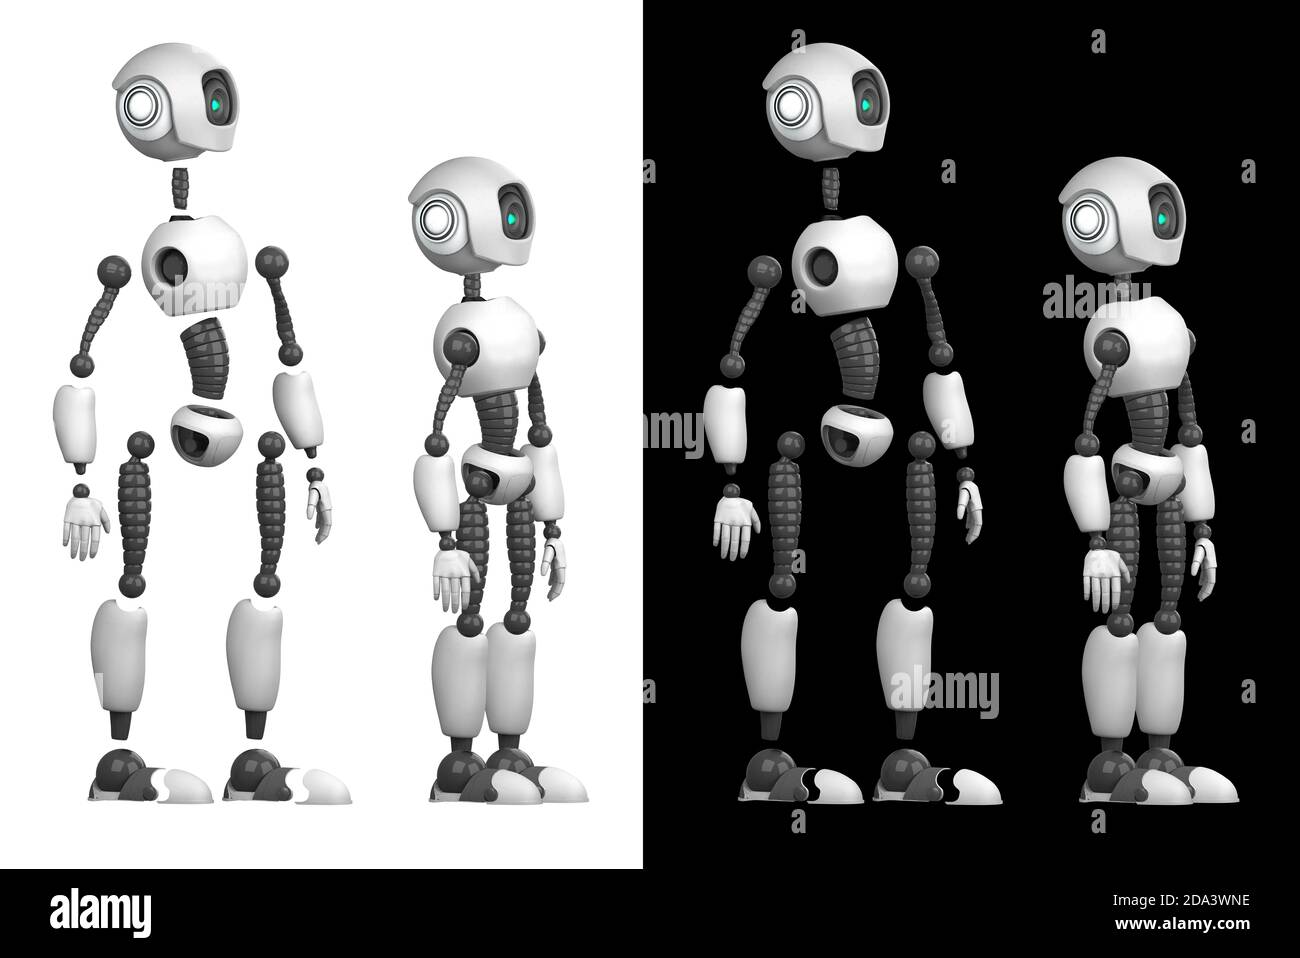 A humanoid robot isolated on black and white background. The robot is divided into component parts for assembly. 3D rendering Stock Photo